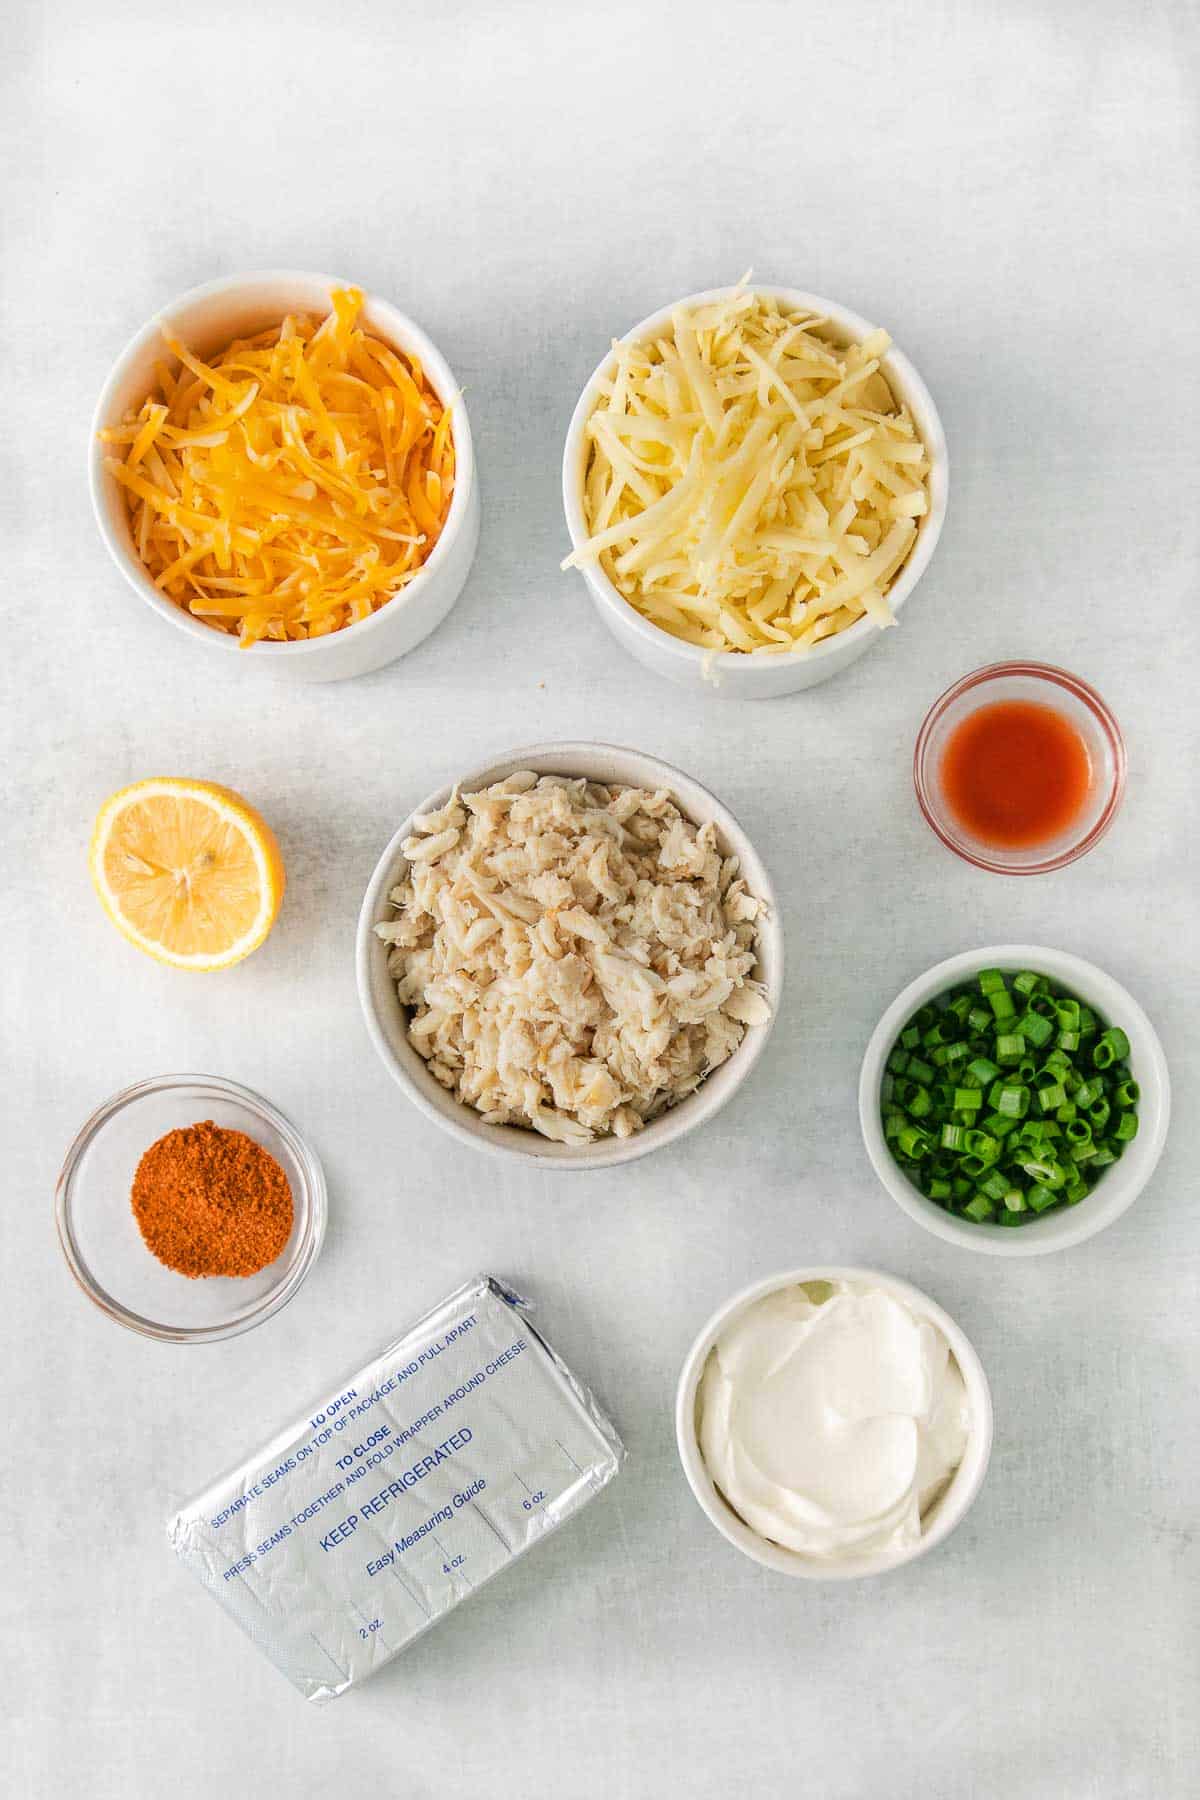 several small bowls with ingredients for crab dip - lump crab meat, cream cheese, sour cream, shredded cheeses, old bay seasoning, and half a lemon.